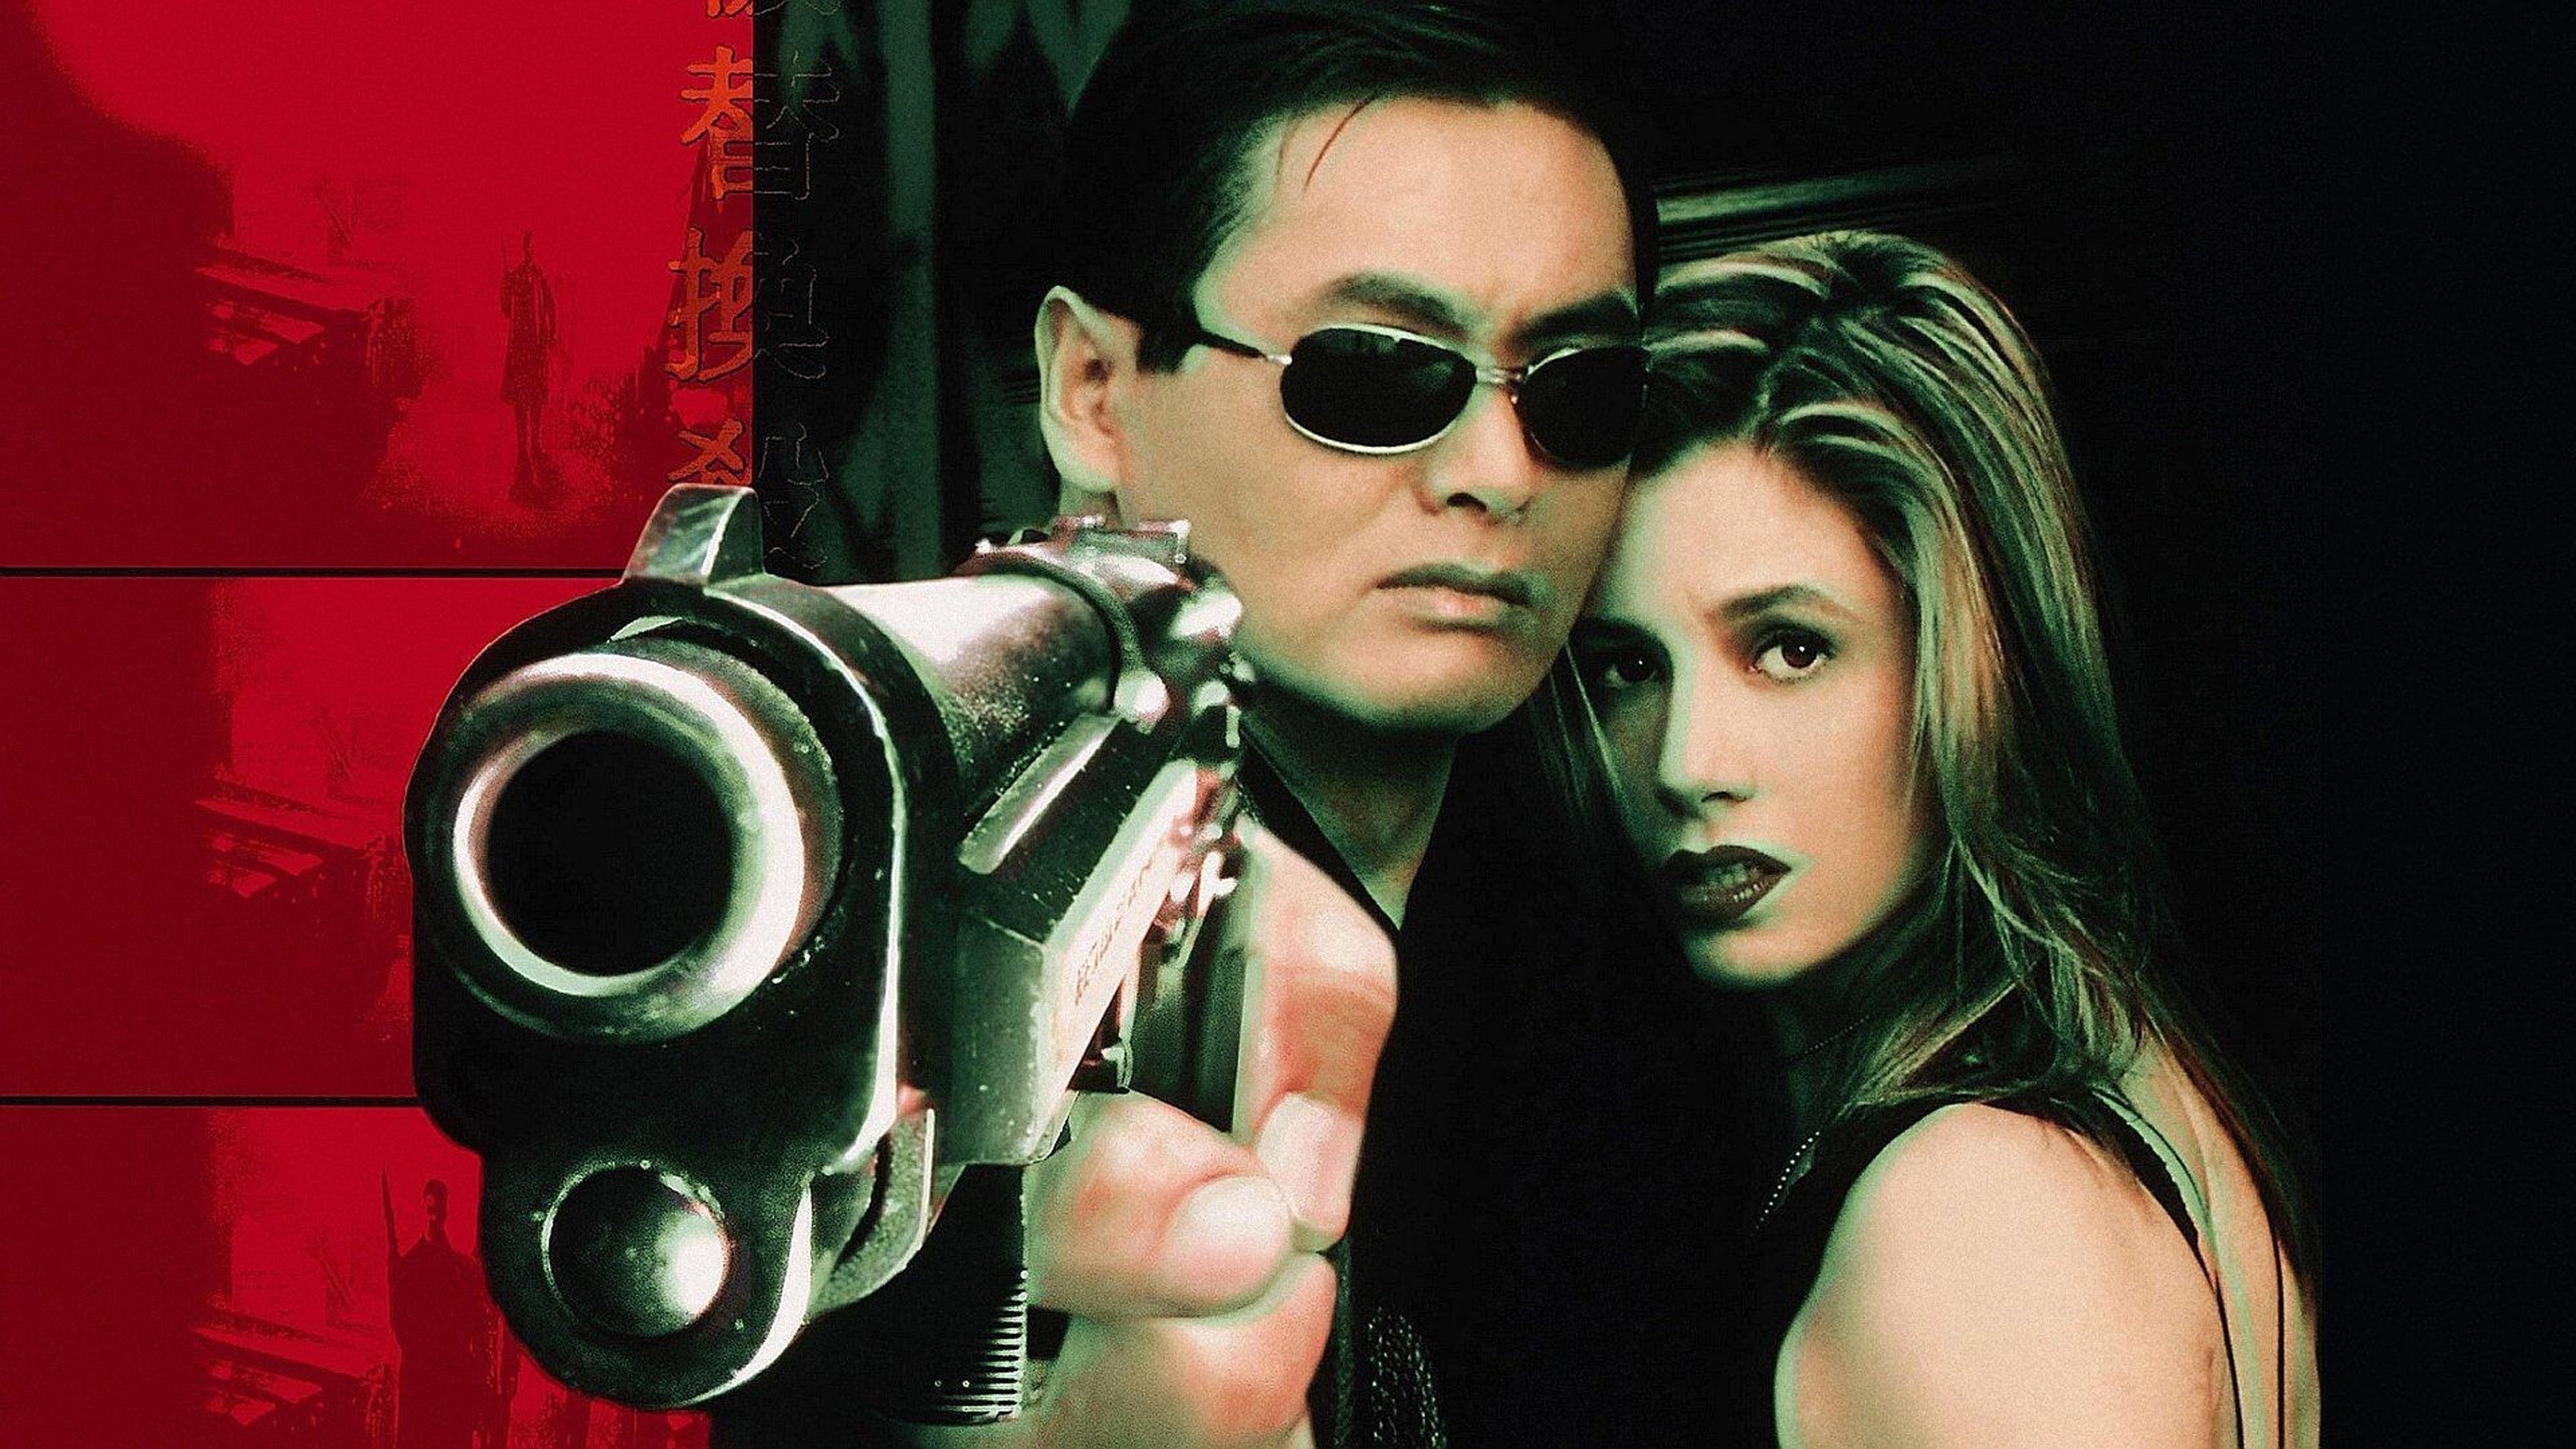 John Woo movies, The replacement killers, Watch full movie free, Exciting action, 3840x2160 4K Desktop